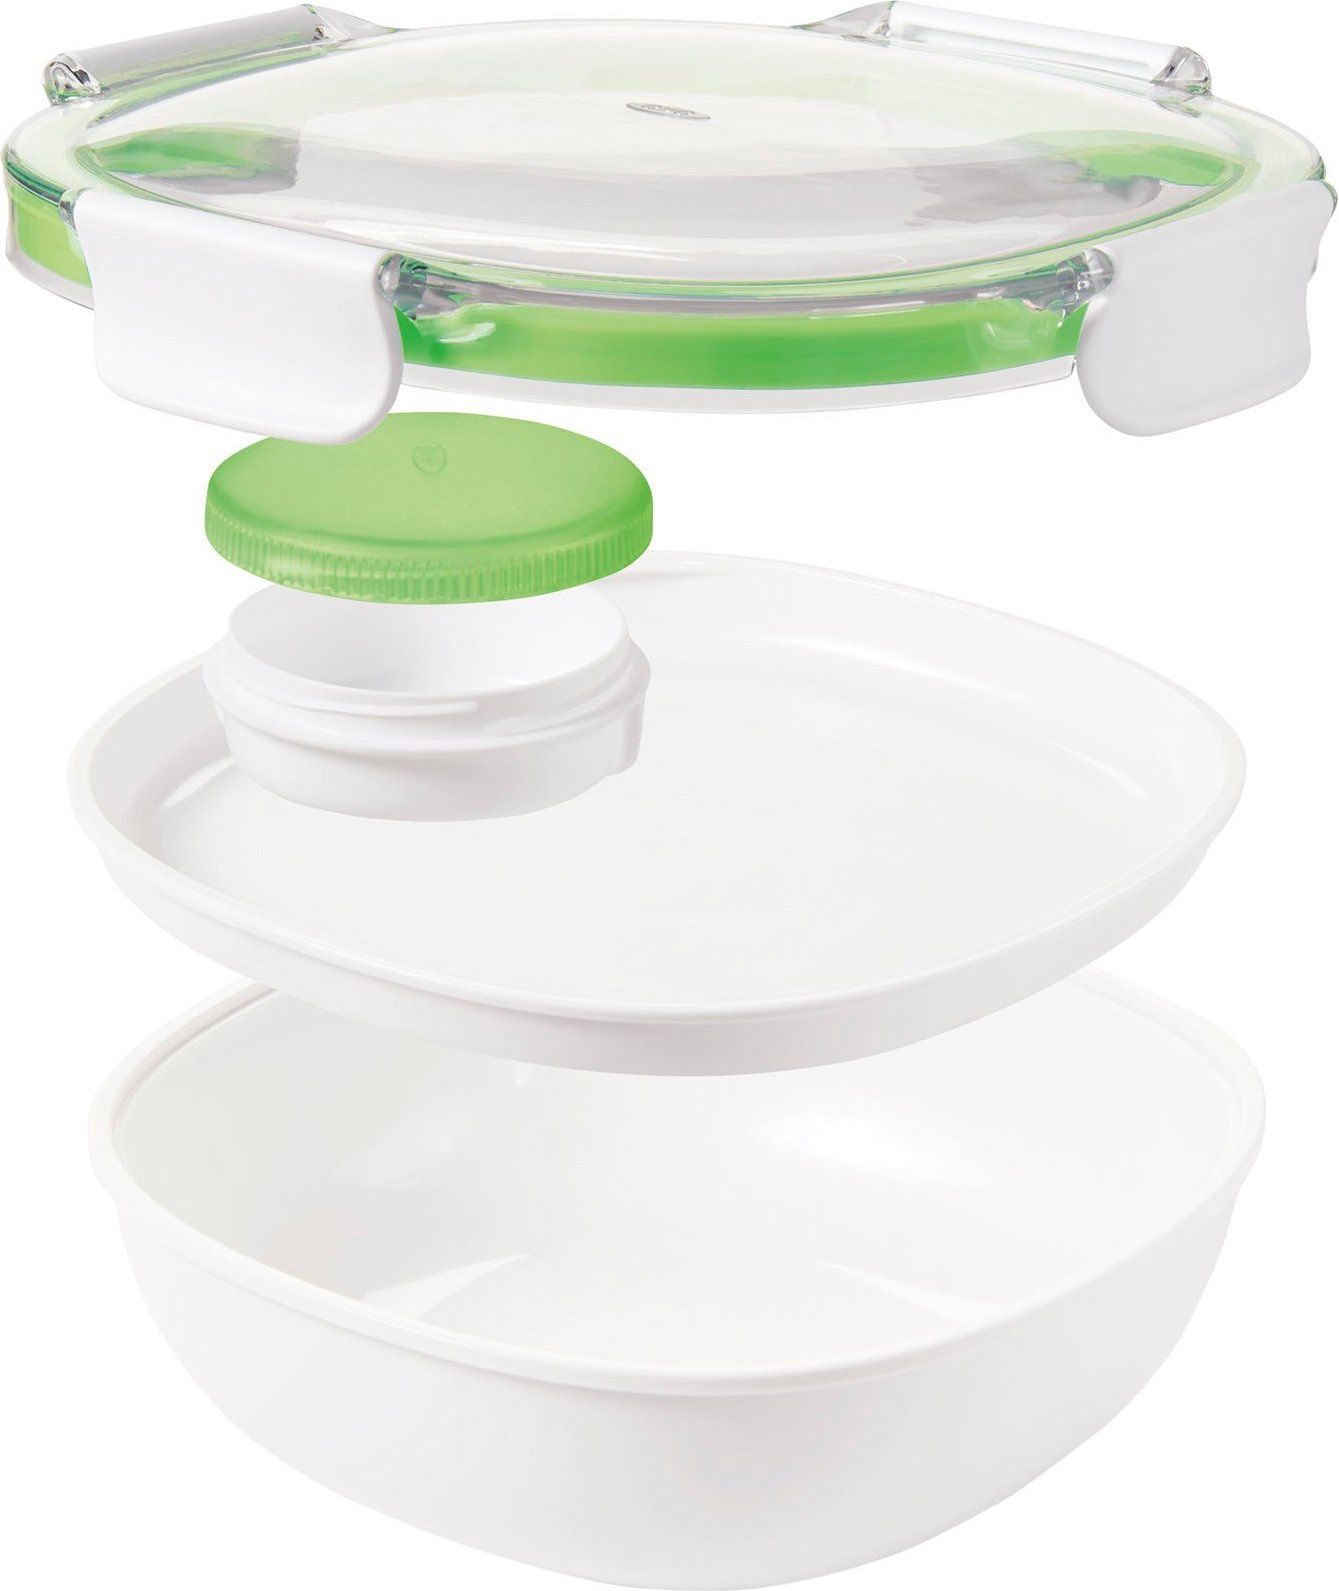 https://3fa-media.com/oxo/oxo-on-the-go-lunchbox-two-leveled-with-a-sauce-container__11139700MLNYK-b-s2500x2500.jpg